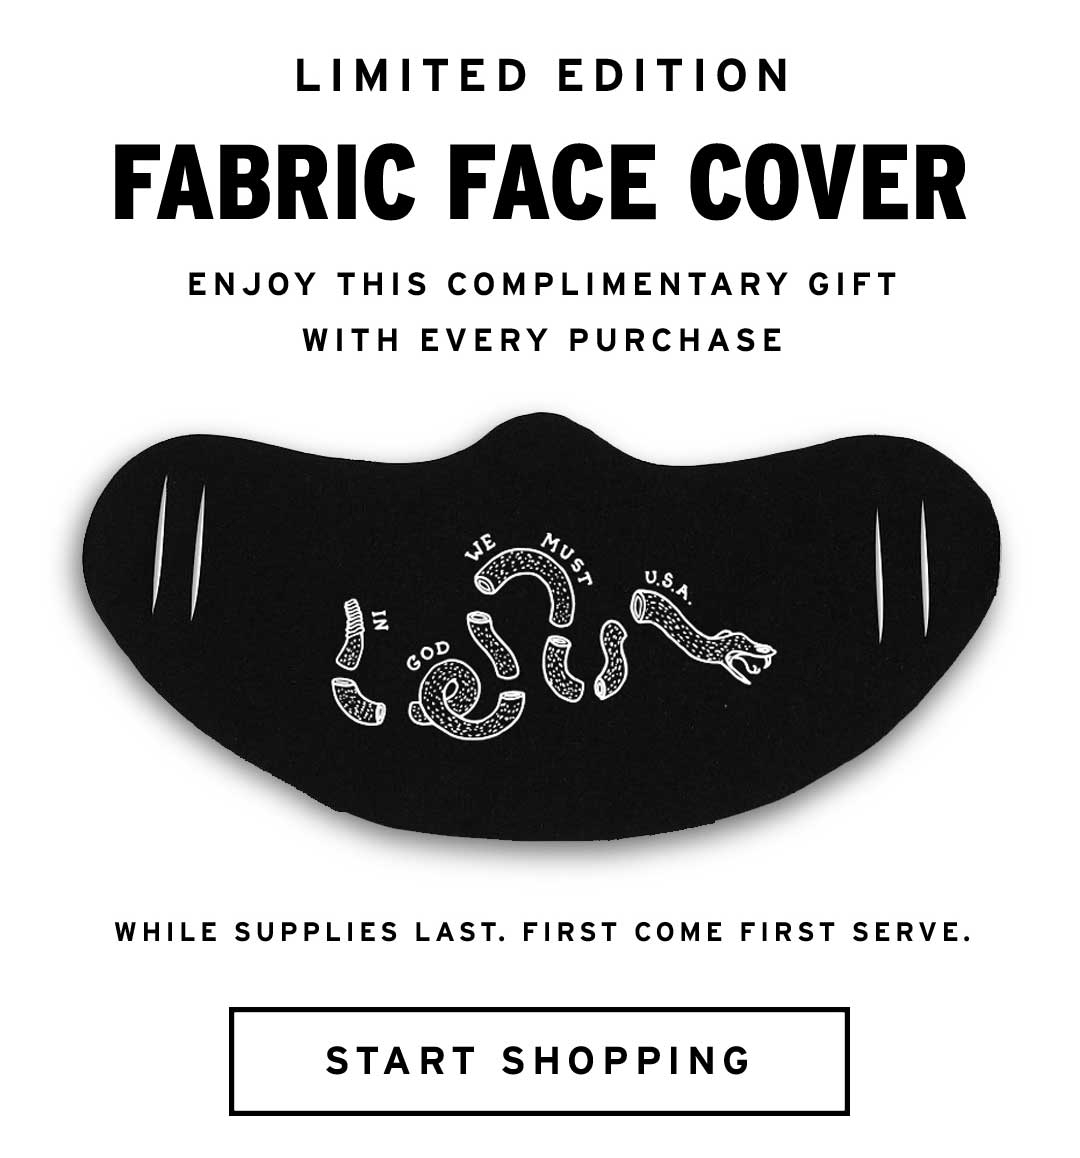 Free Fabric Face Cover